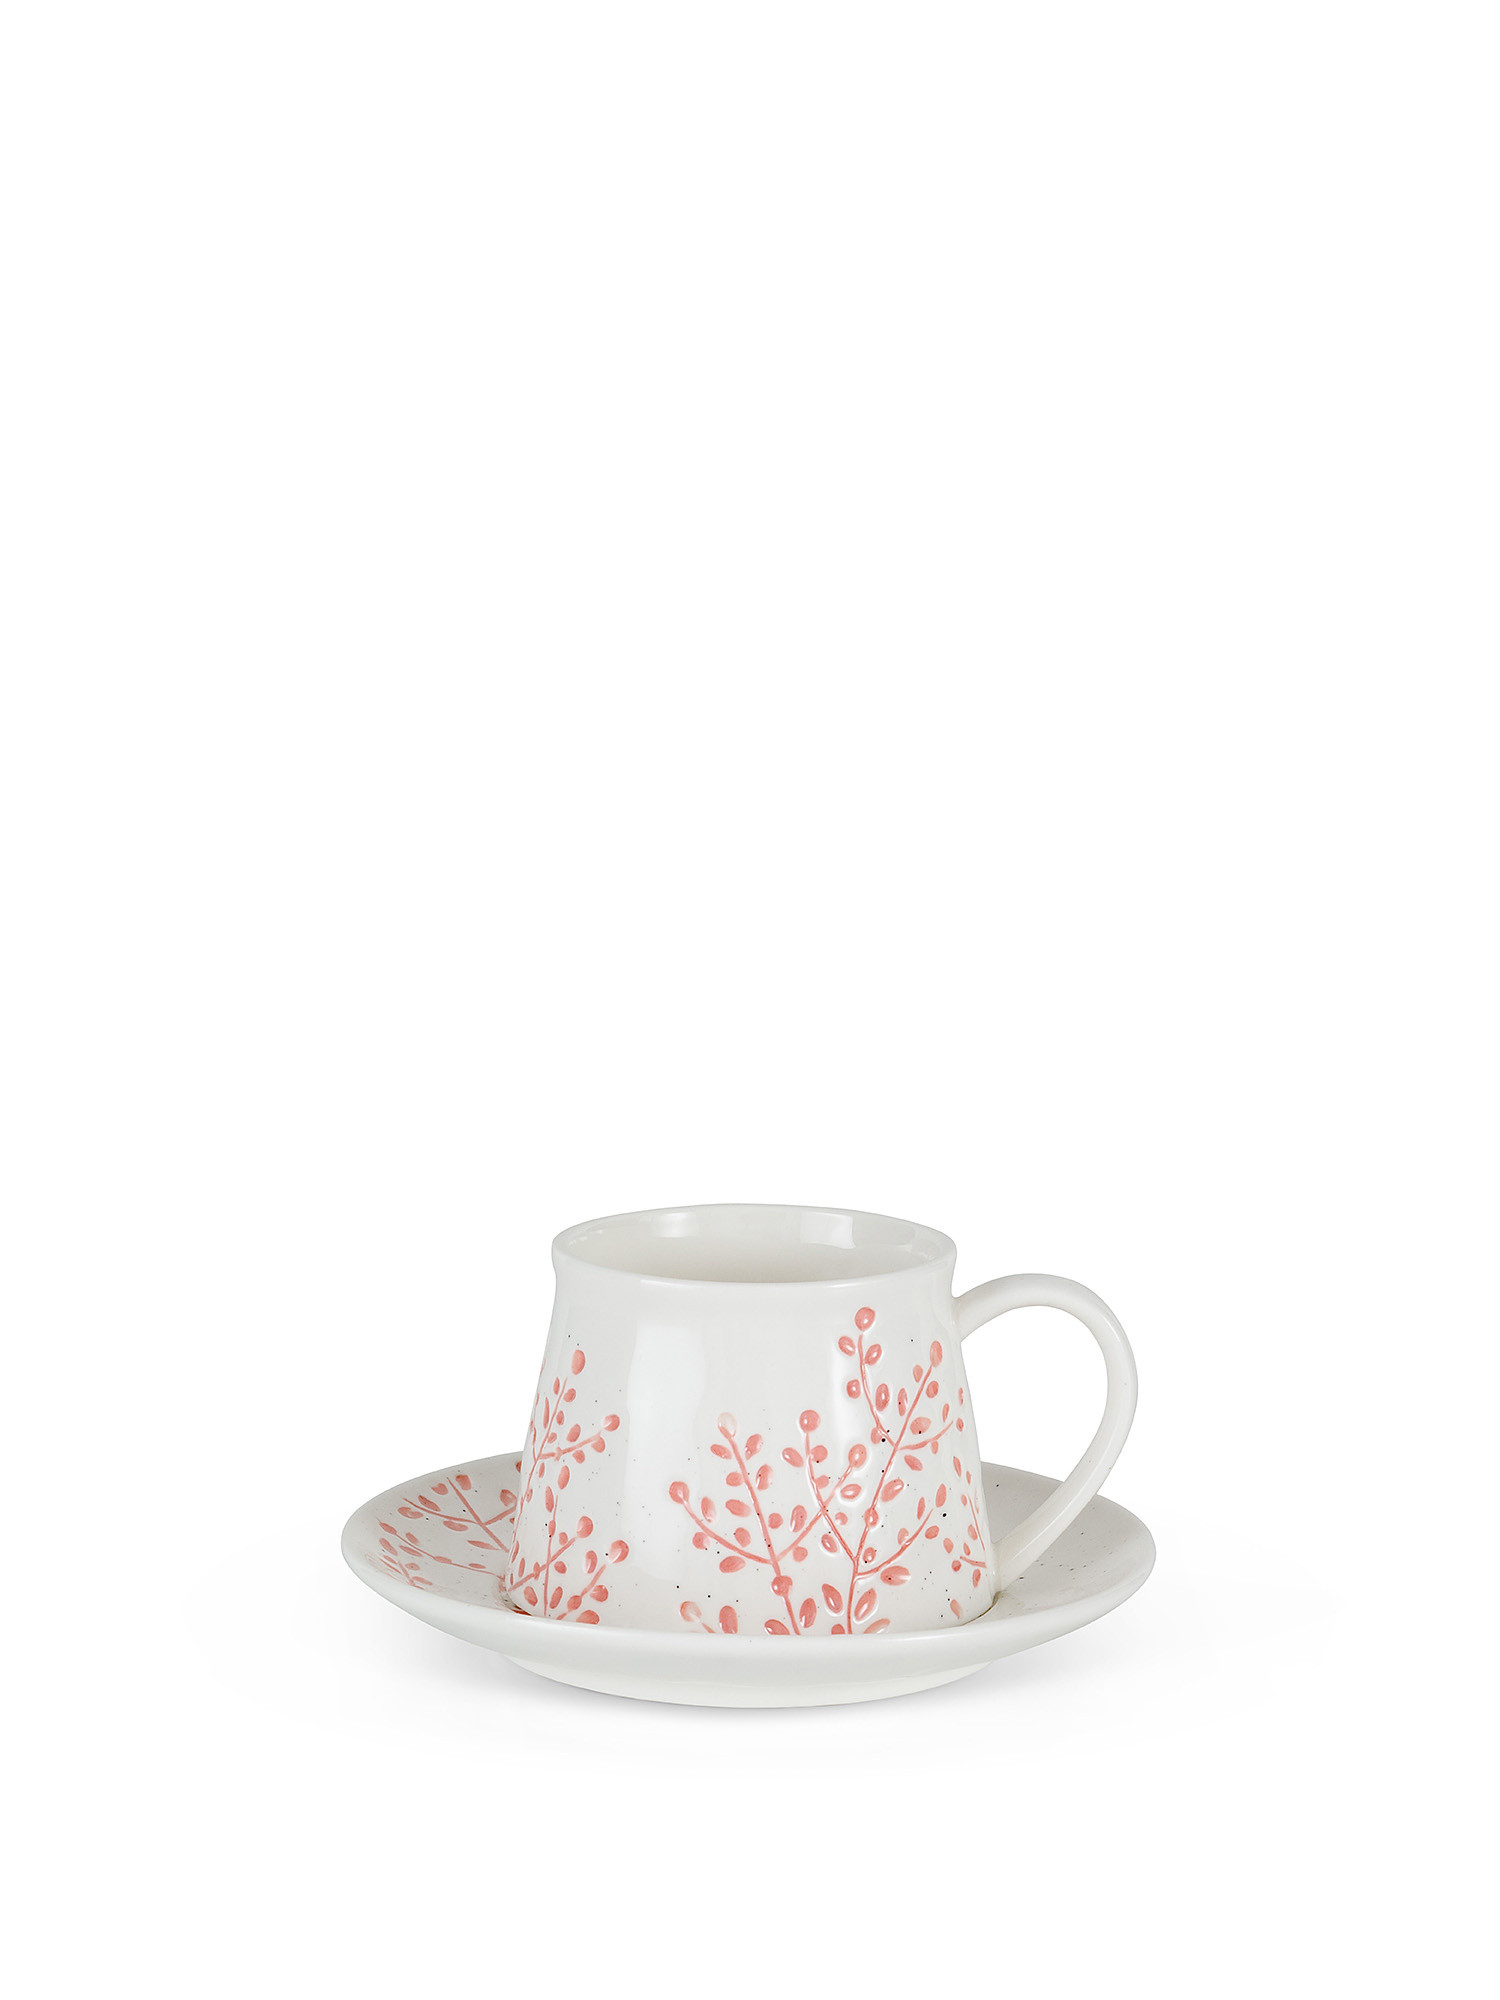 Porcelain tea cup with foliage motif, White, large image number 0